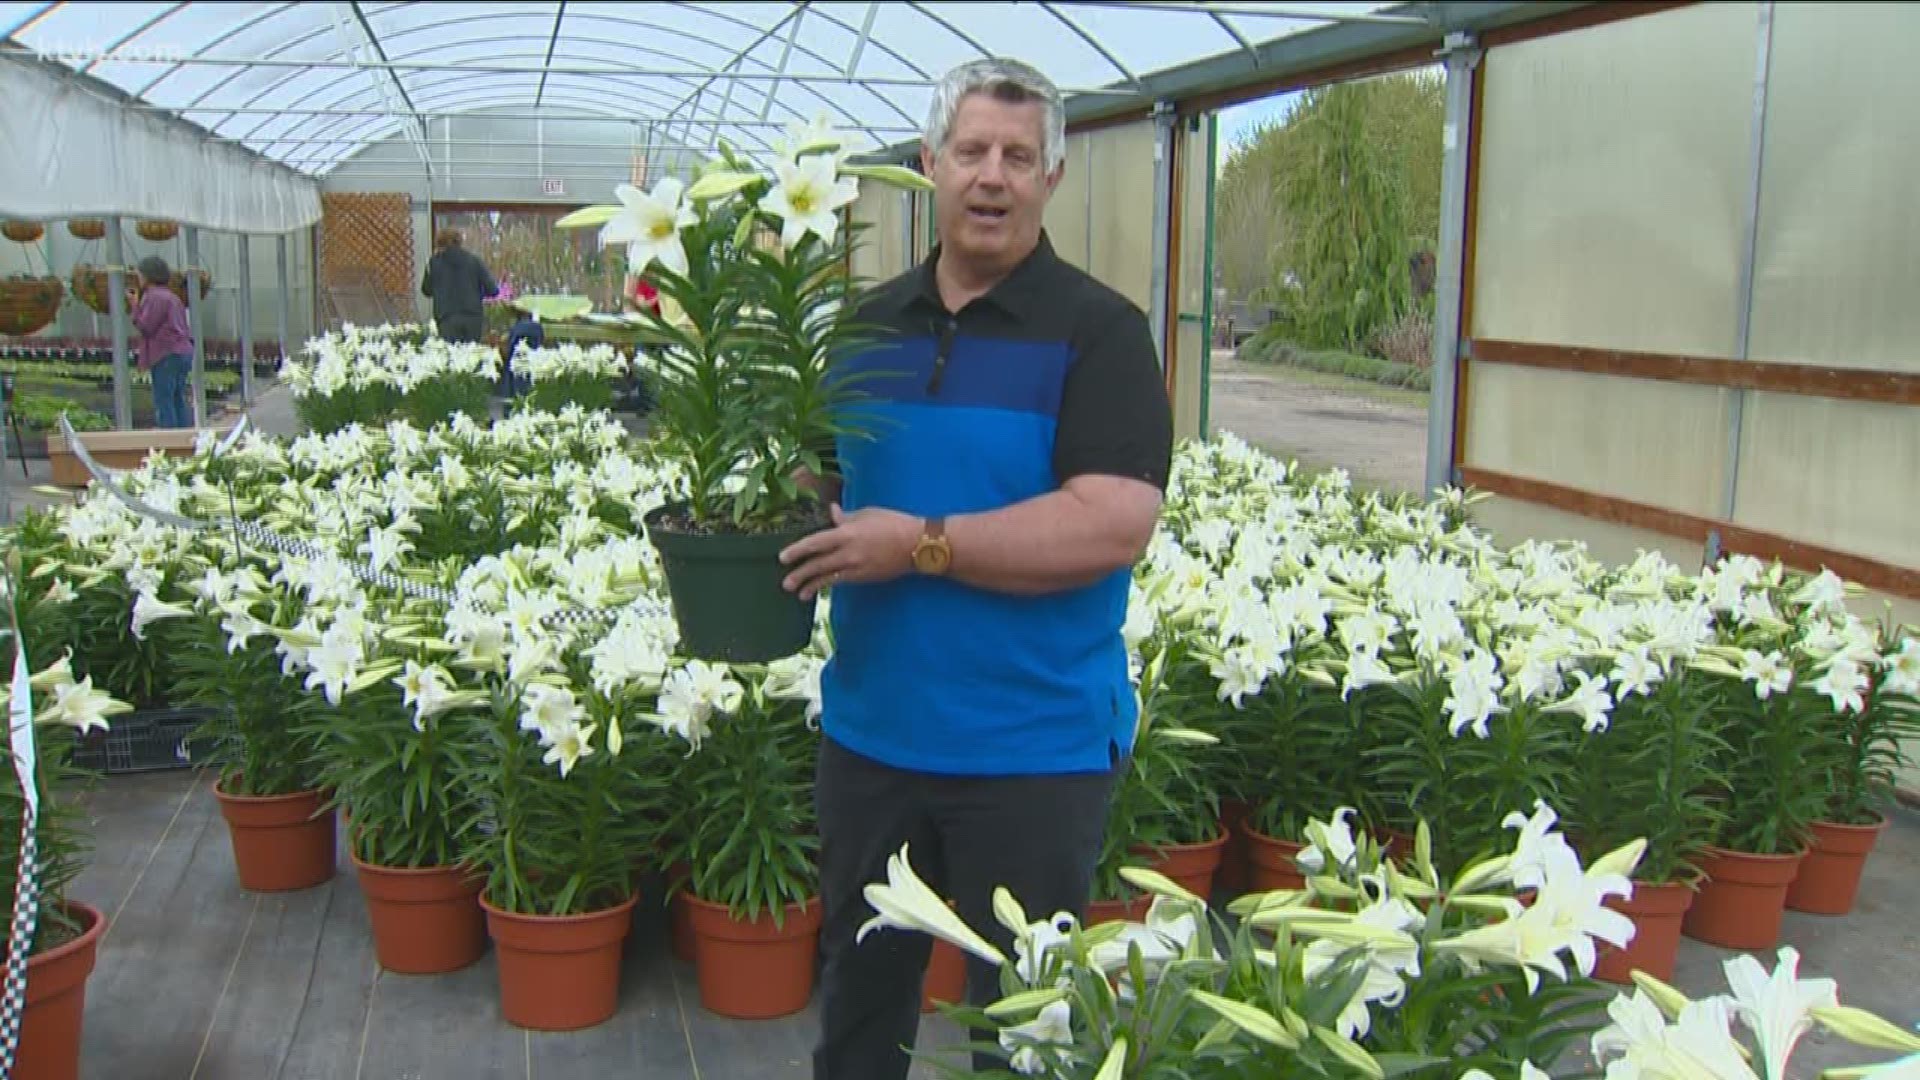 Jim Duthie says with proper care, Easter lilies will continue to bloom long after the holiday has come and gone.